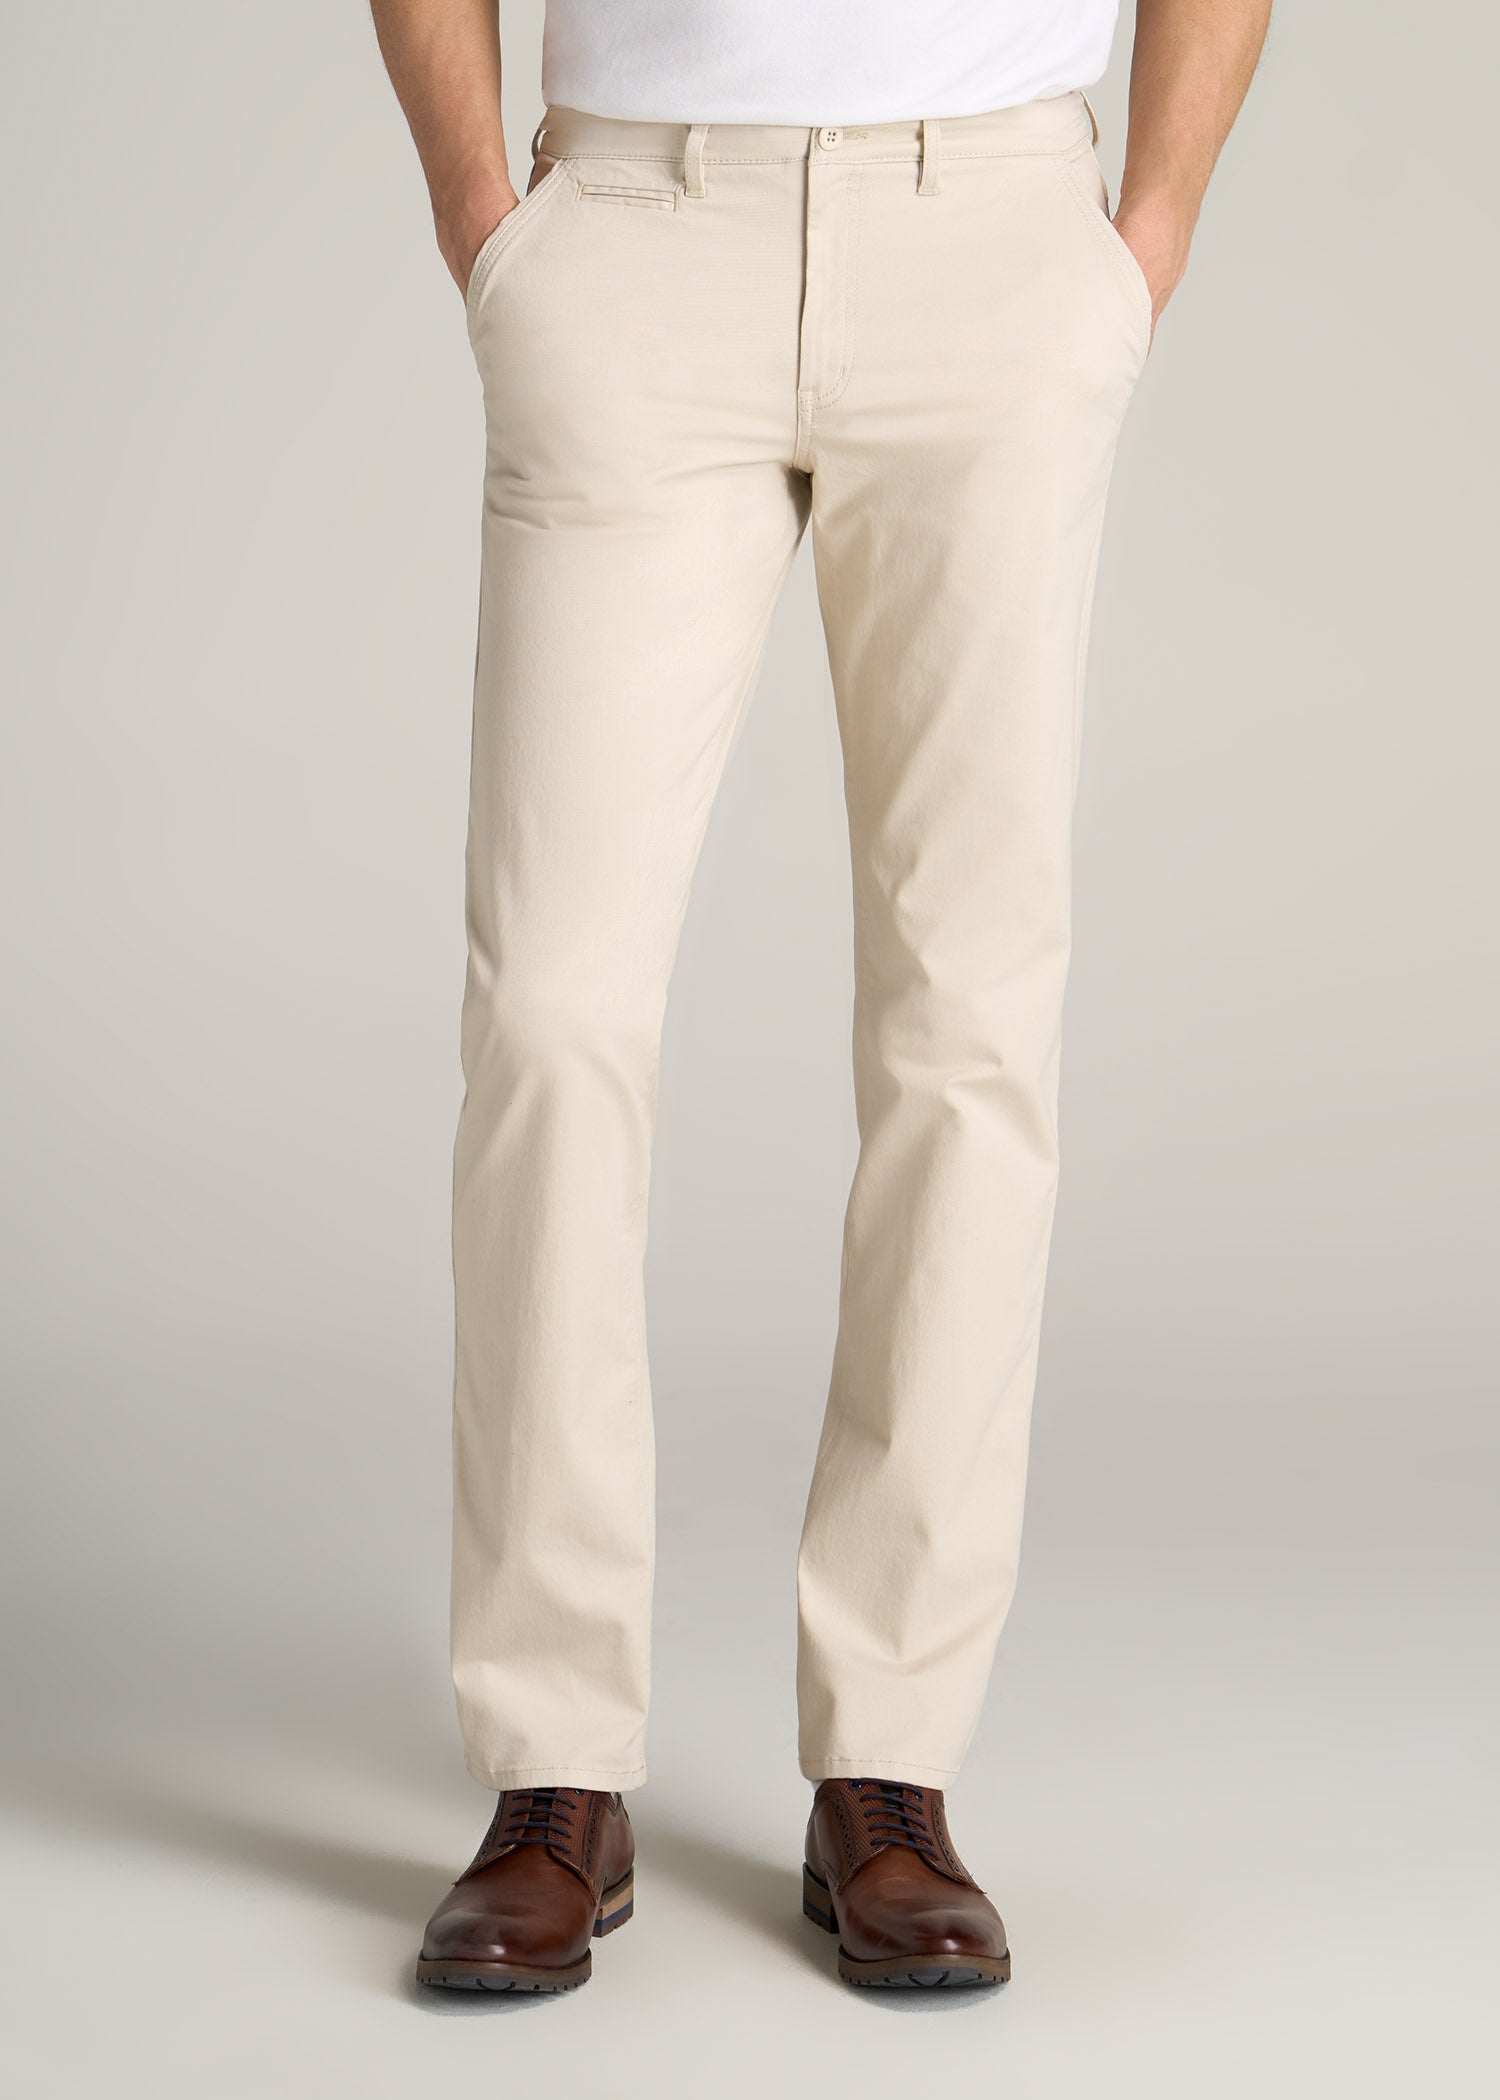 8 Ways To Wear Khaki Pants, How to Style Beige Chinos